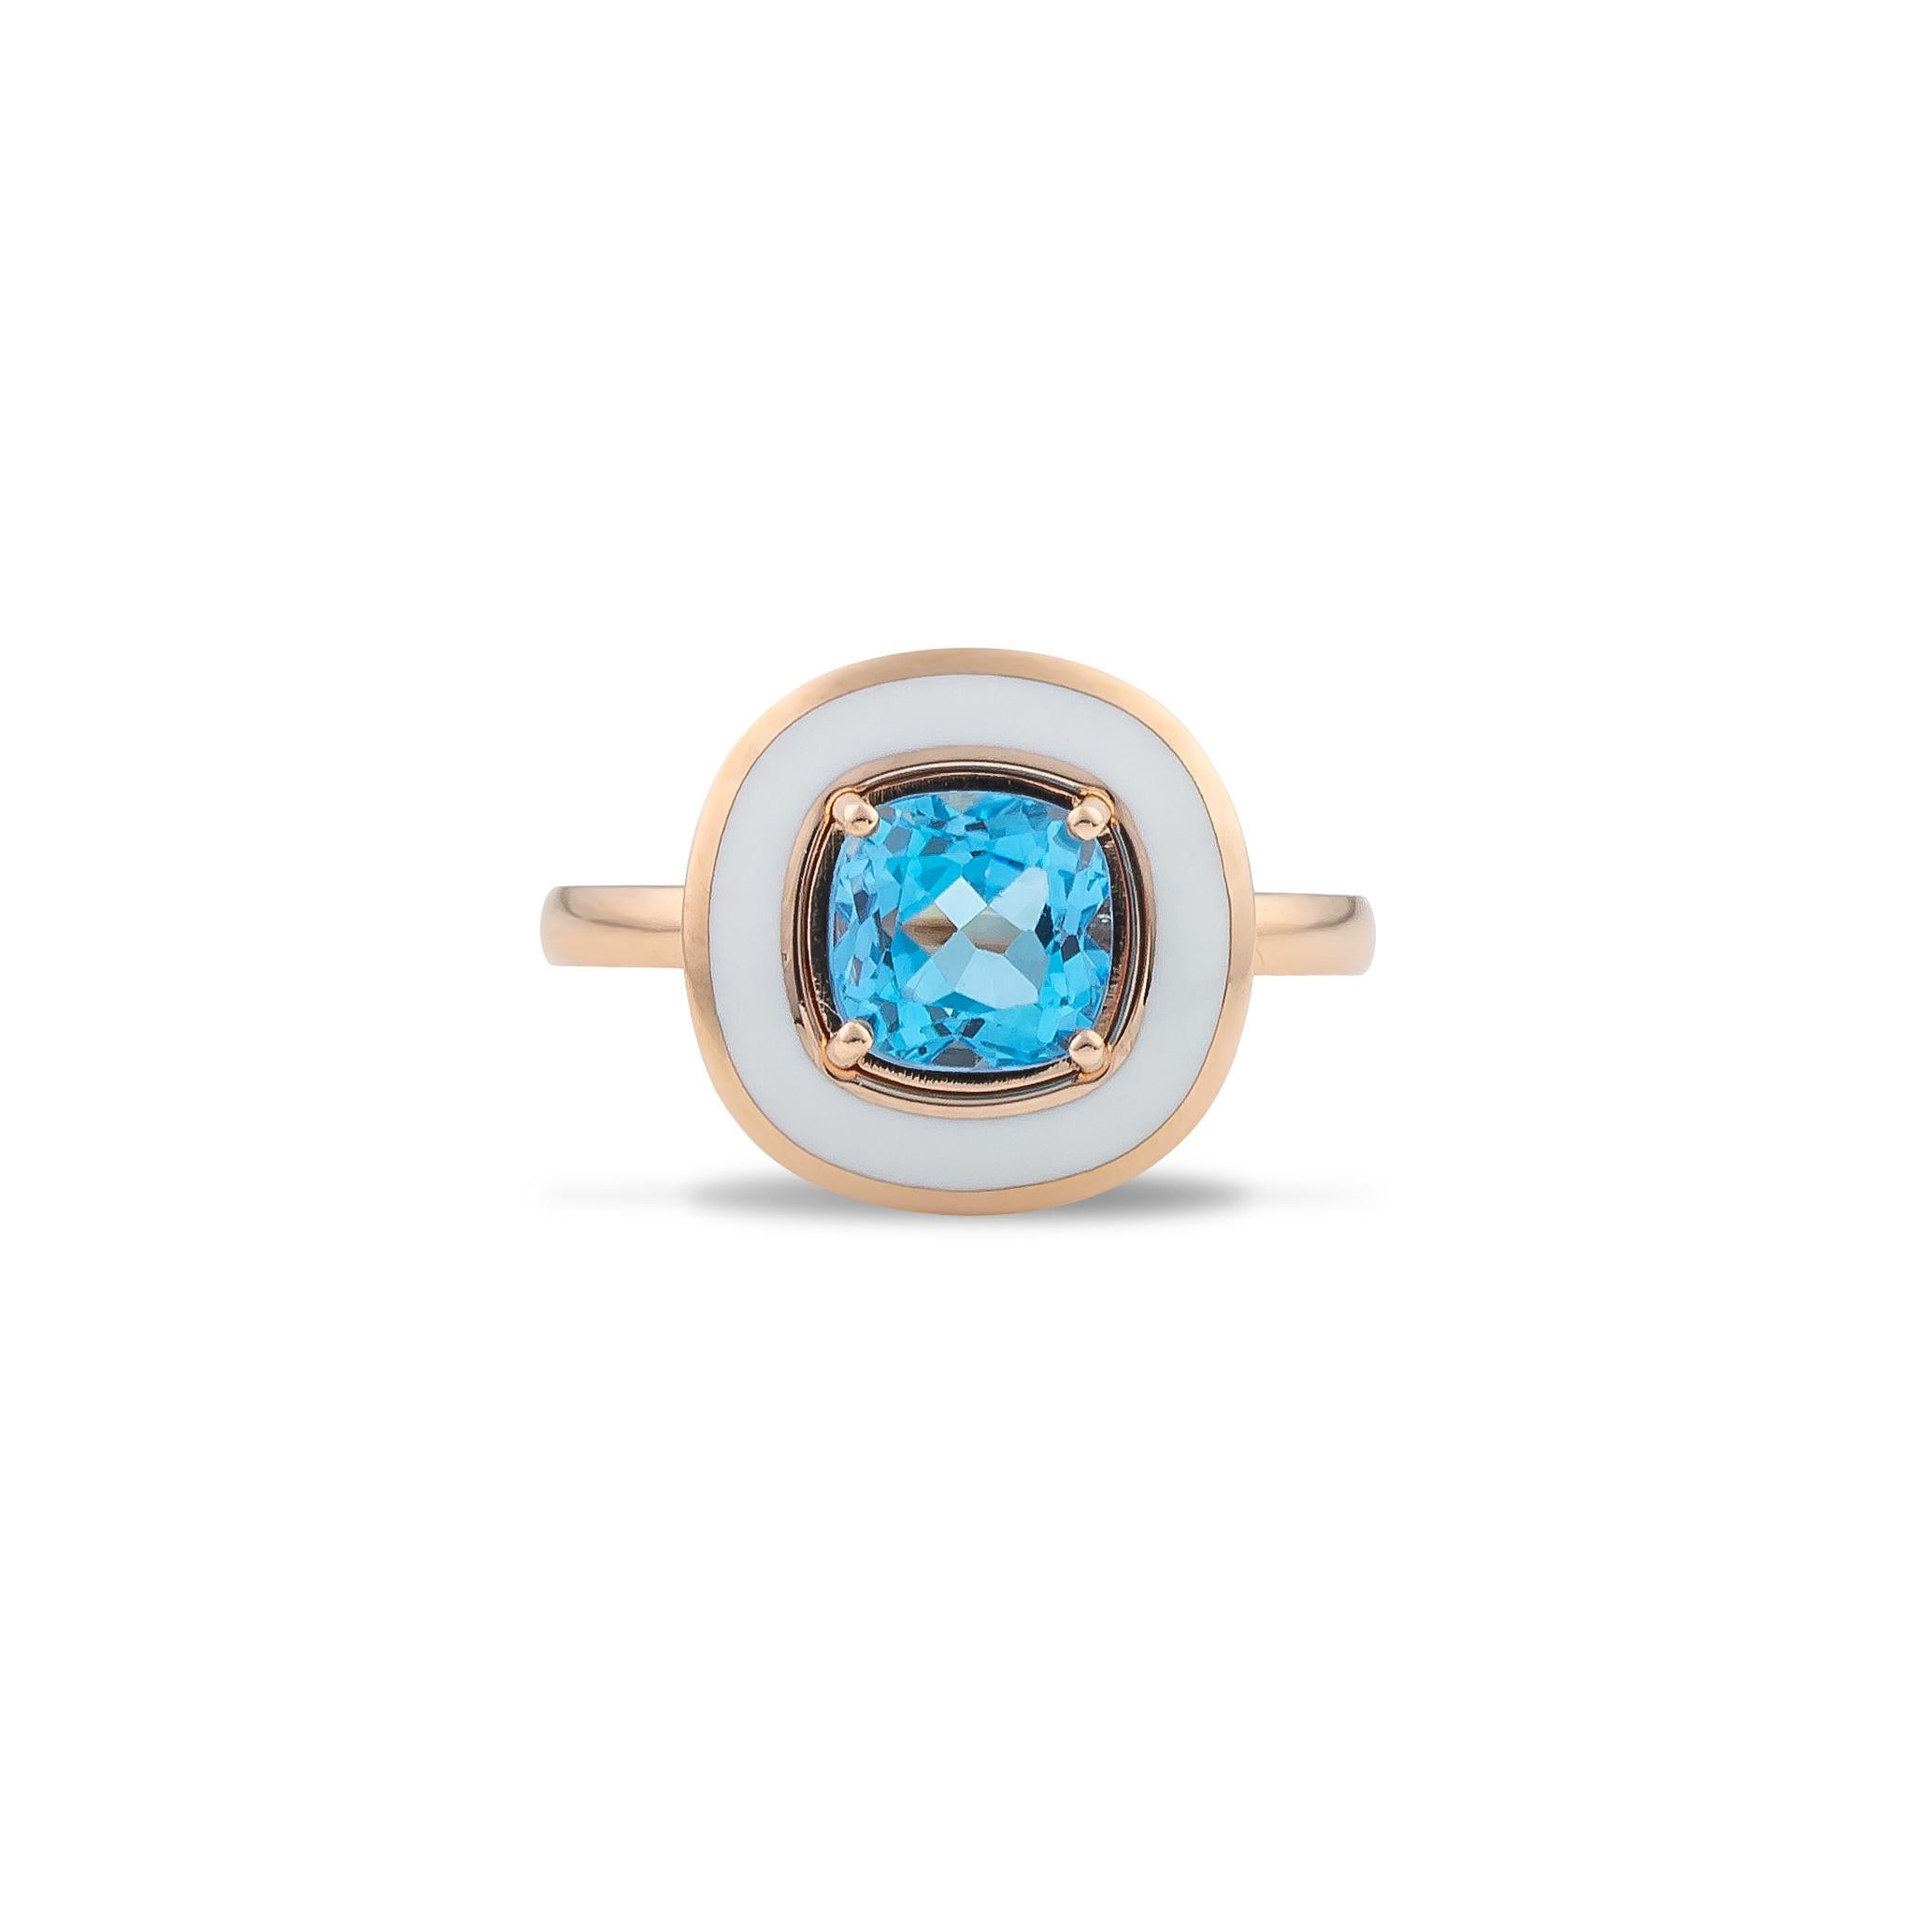 Contemporary White Enamel Cocktail Ring with Cushion Blue Topaz 2.15 Carat in 18 Kt Rose Gold For Sale